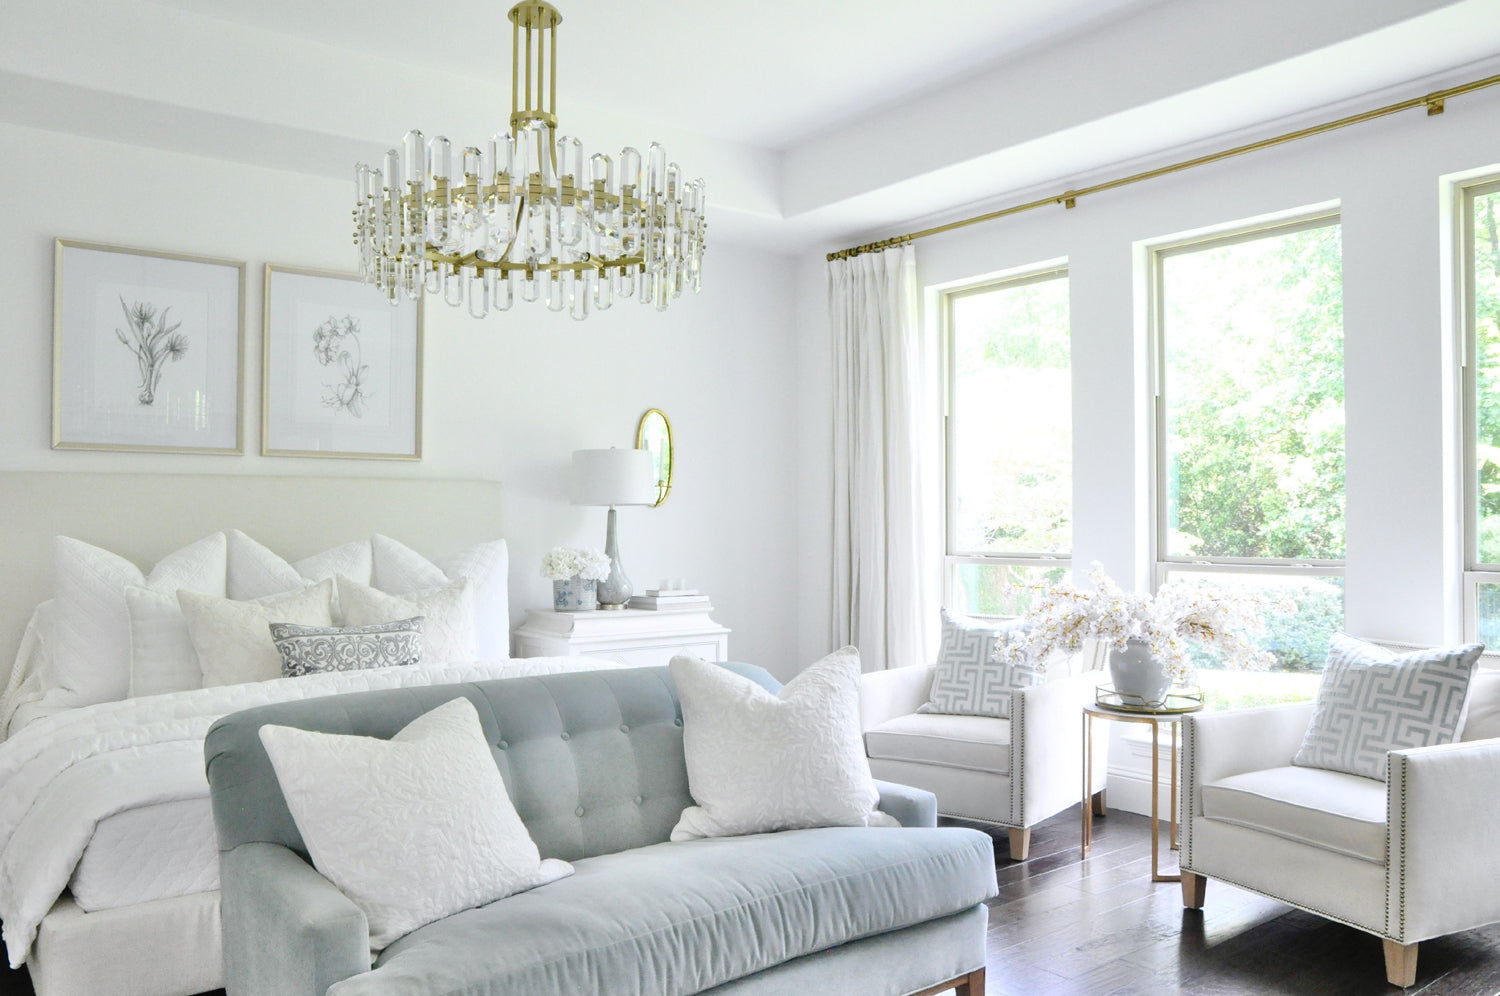 A Modern Crystal Chandeliers showcased in a Modern Bedroom setting.